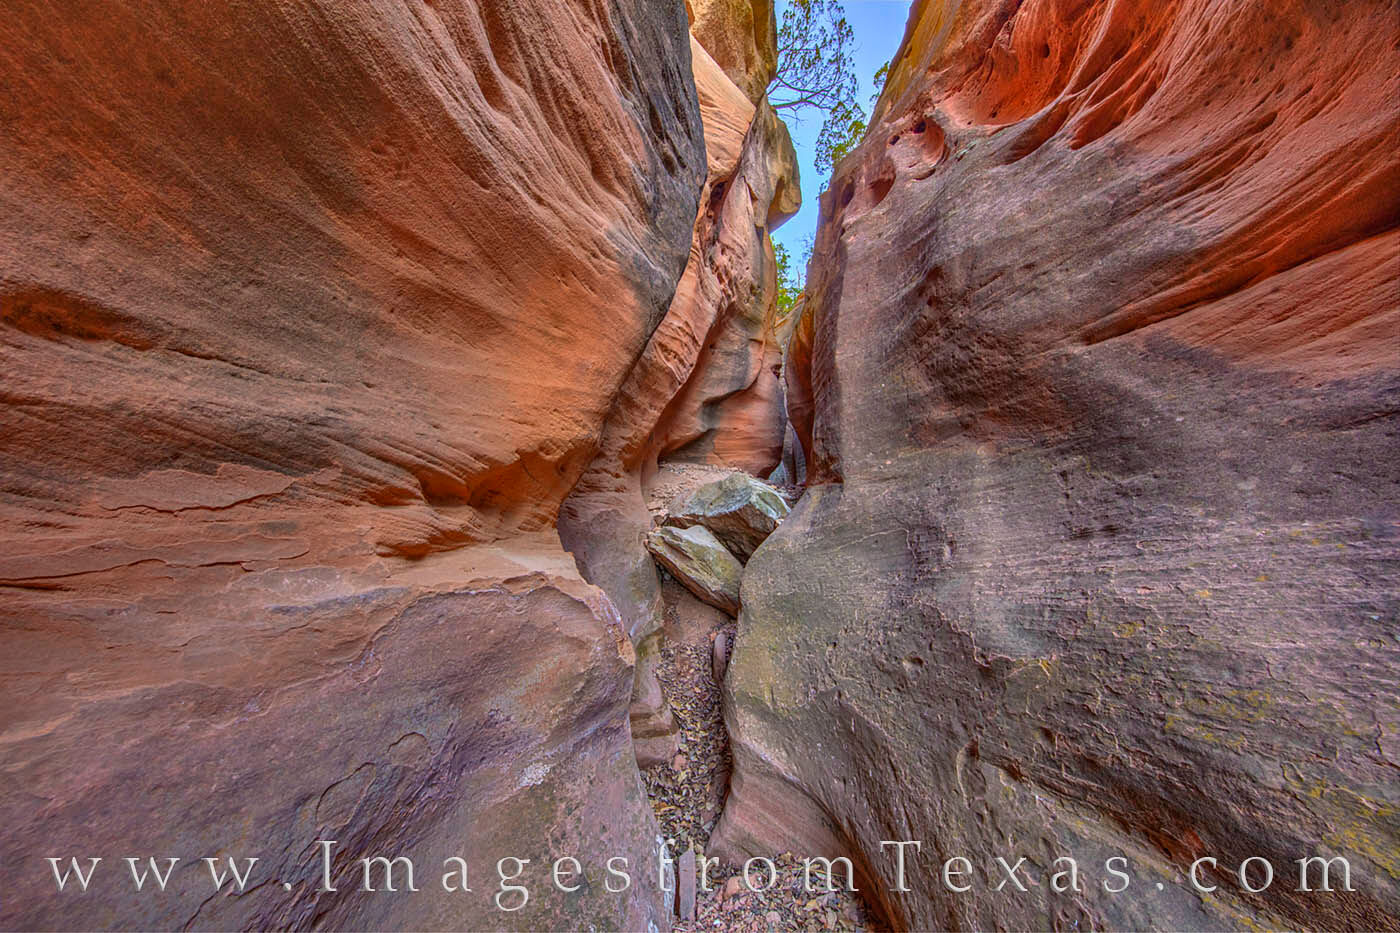 Just above Fern Cave, the Fern Cave Slot Canyon is a beautiful Trujillo sandstone formation.